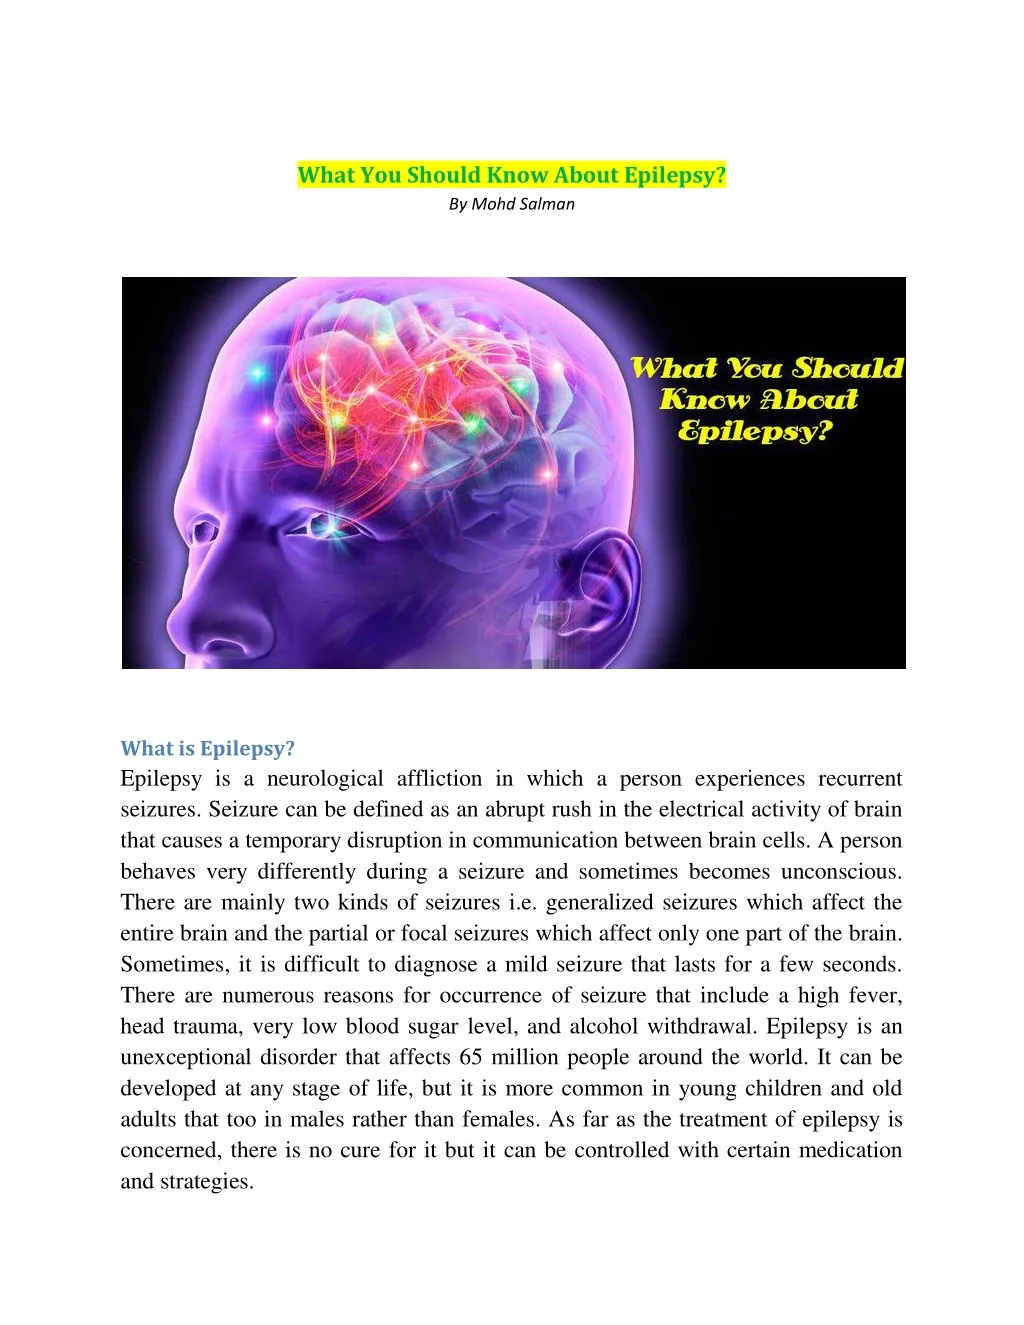 what you should know about epilepsy by mohd salman